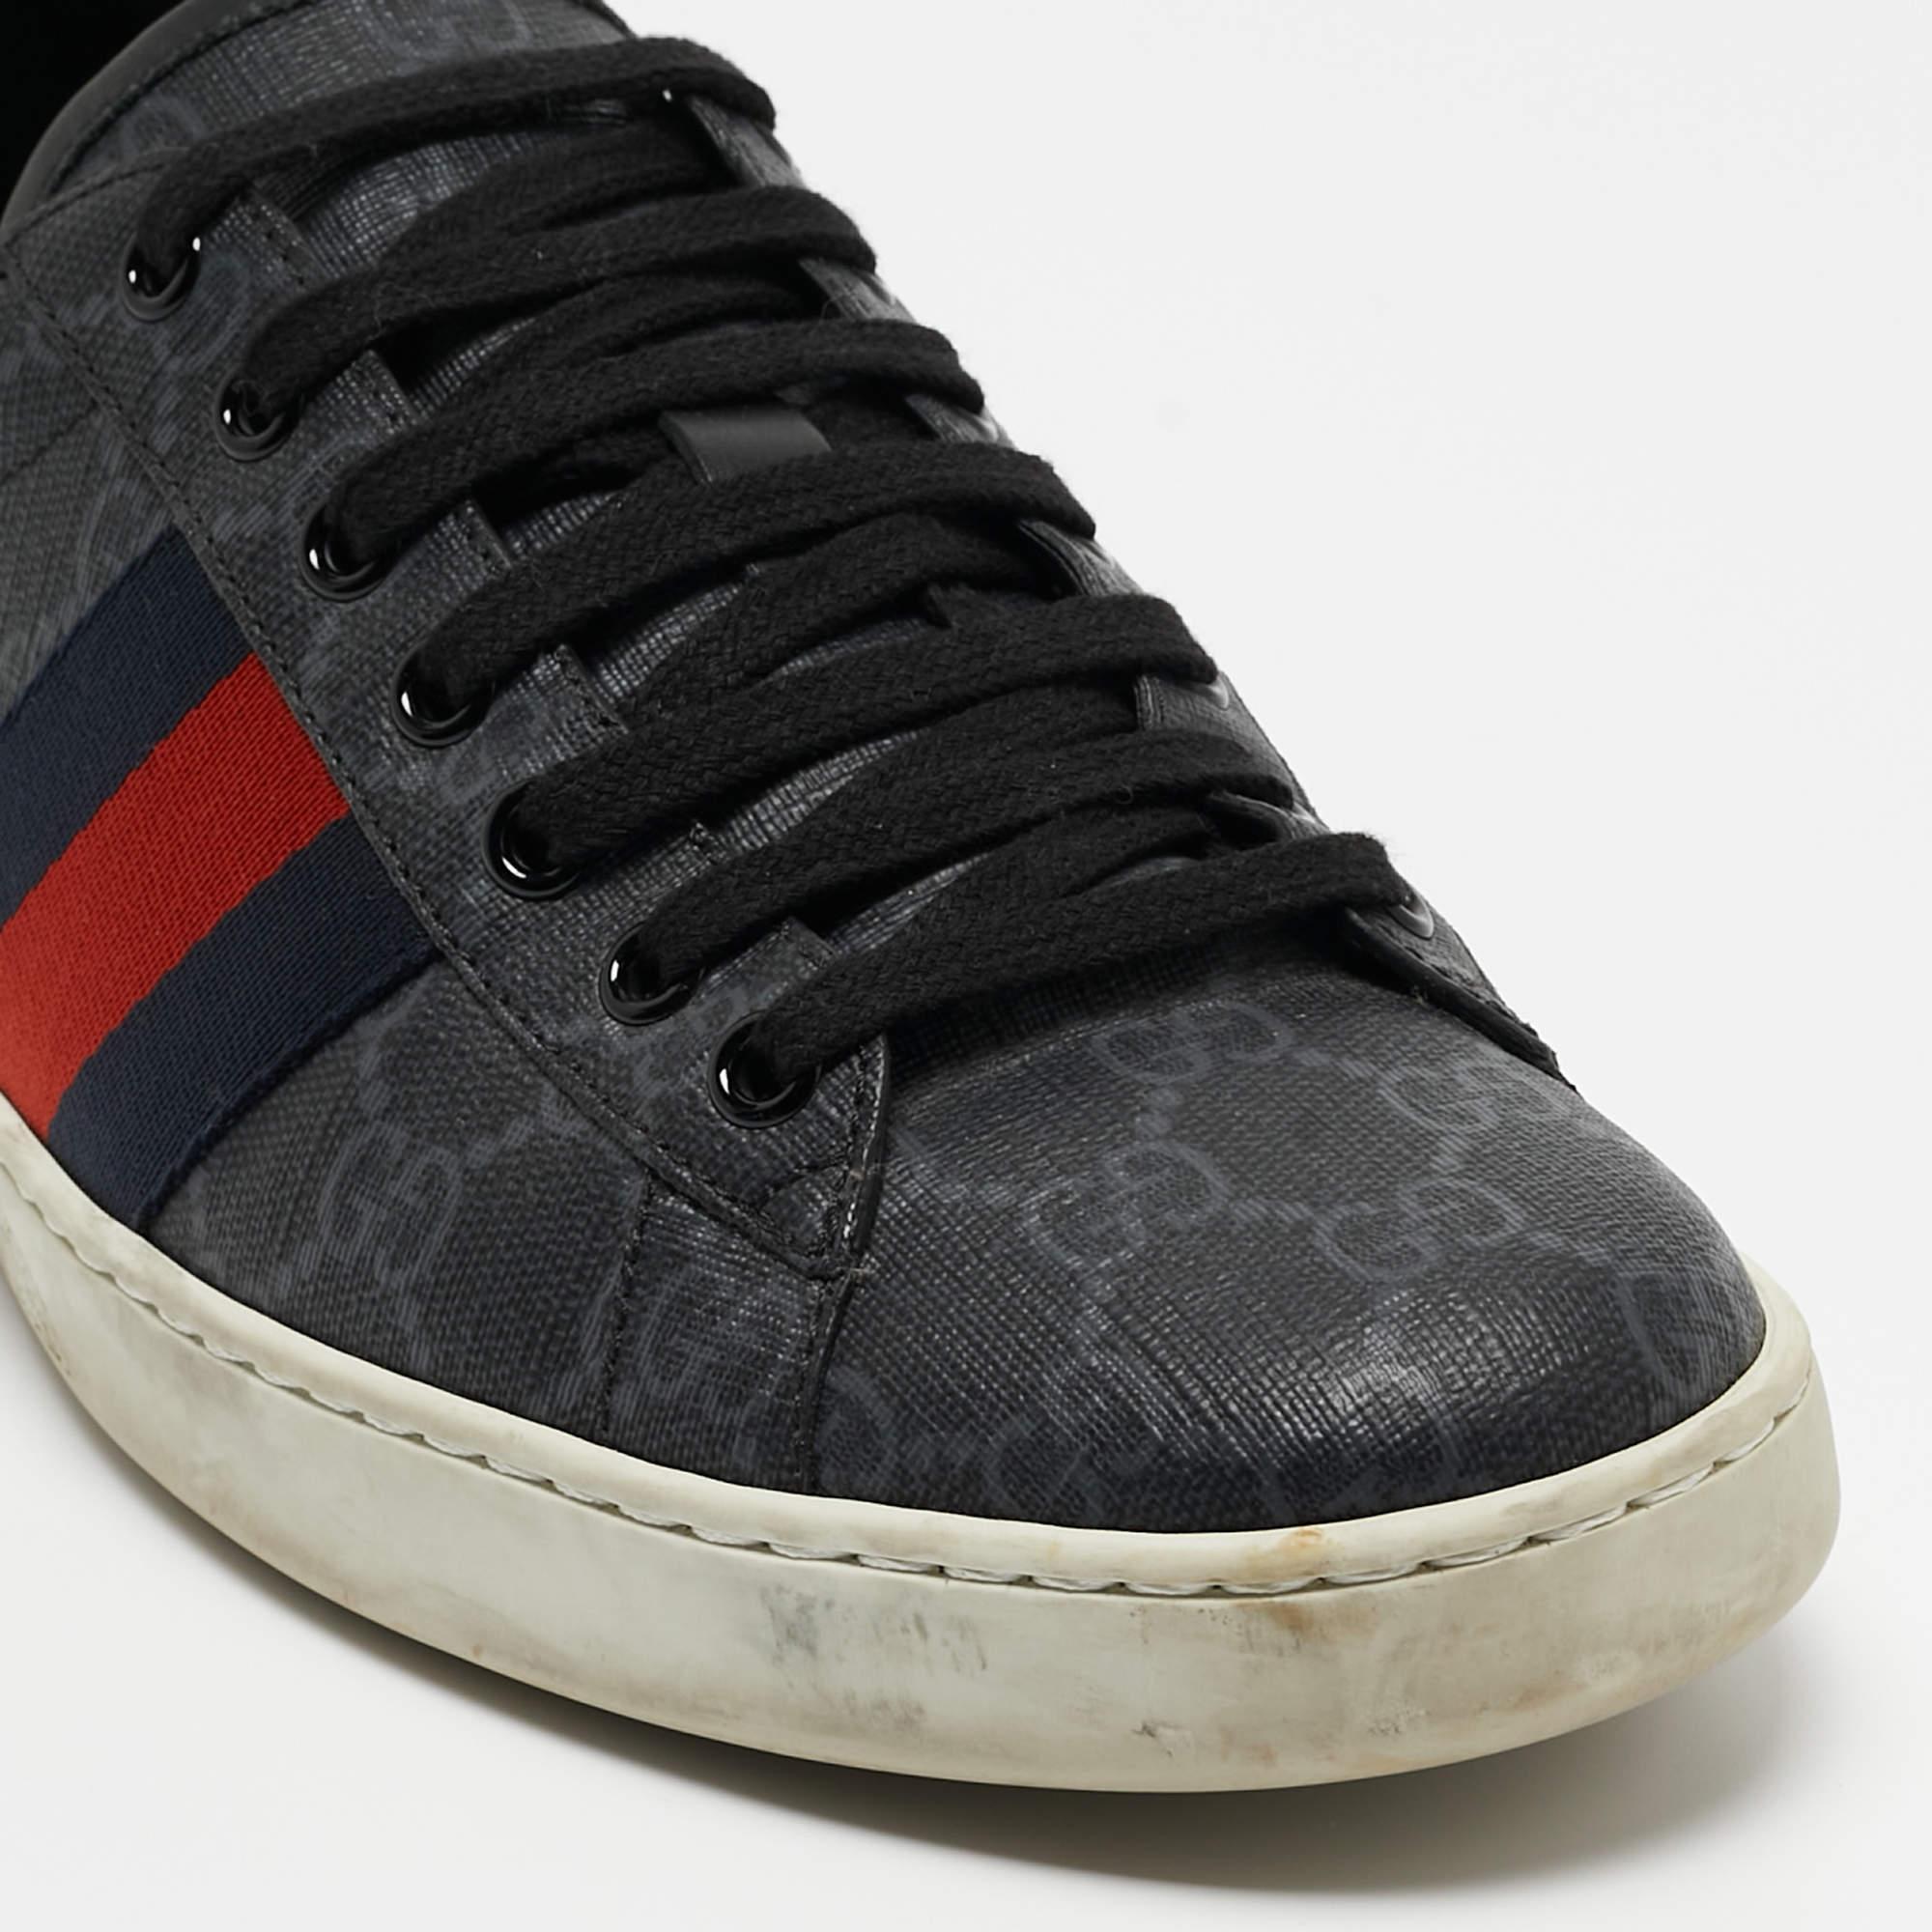 Gucci Two Tone GG Supreme Canvas Ace Sneakers Size 42.5 For Sale 1